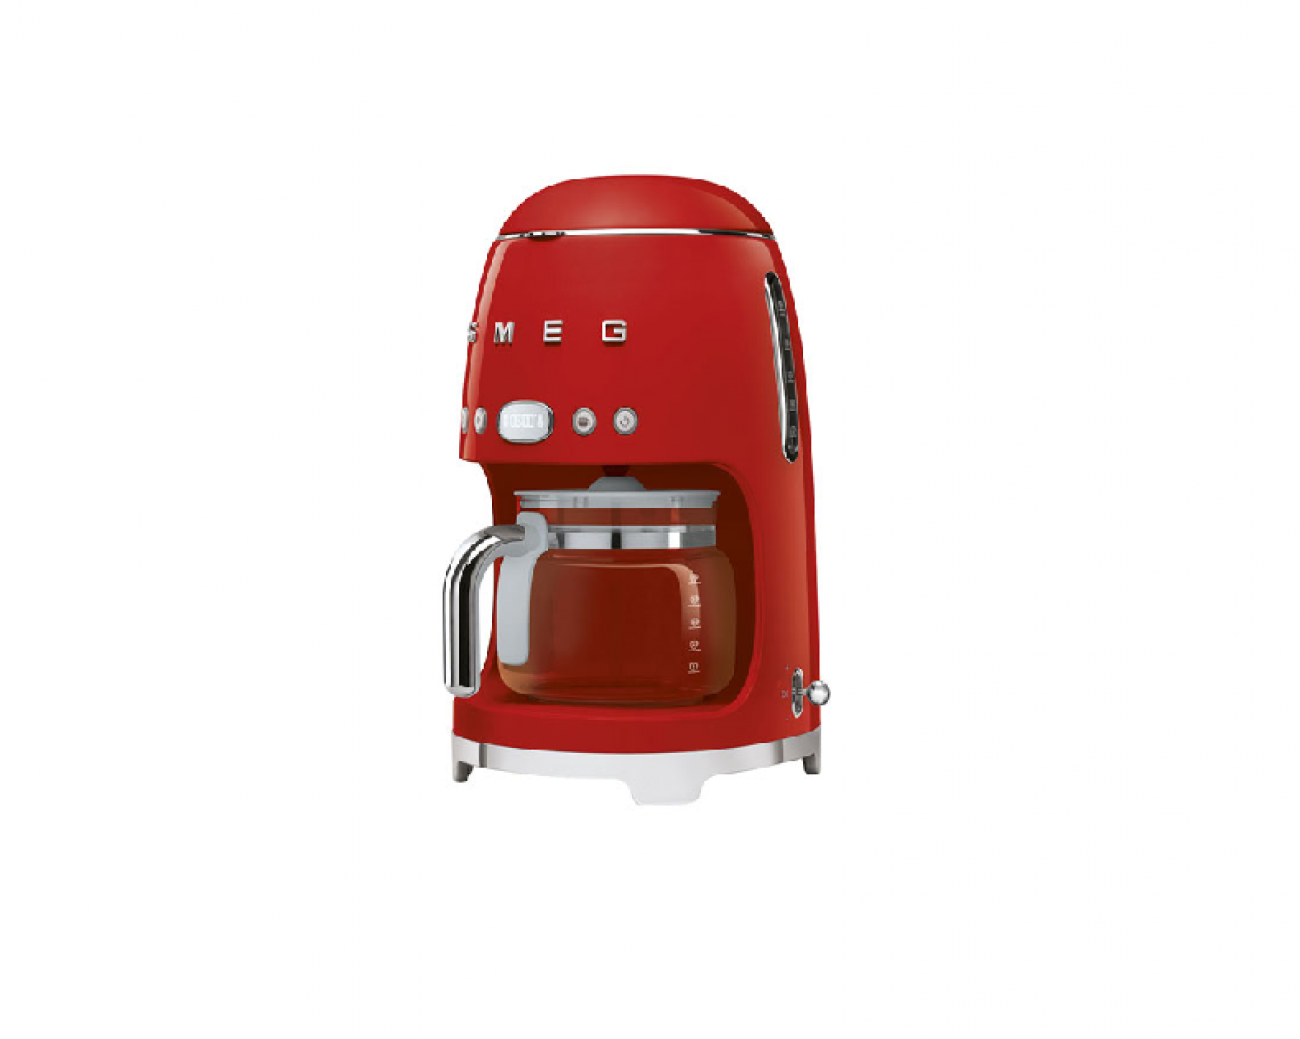 Smeg 50's Style Programmable Drip Coffee Maker - 10-Cup - Red